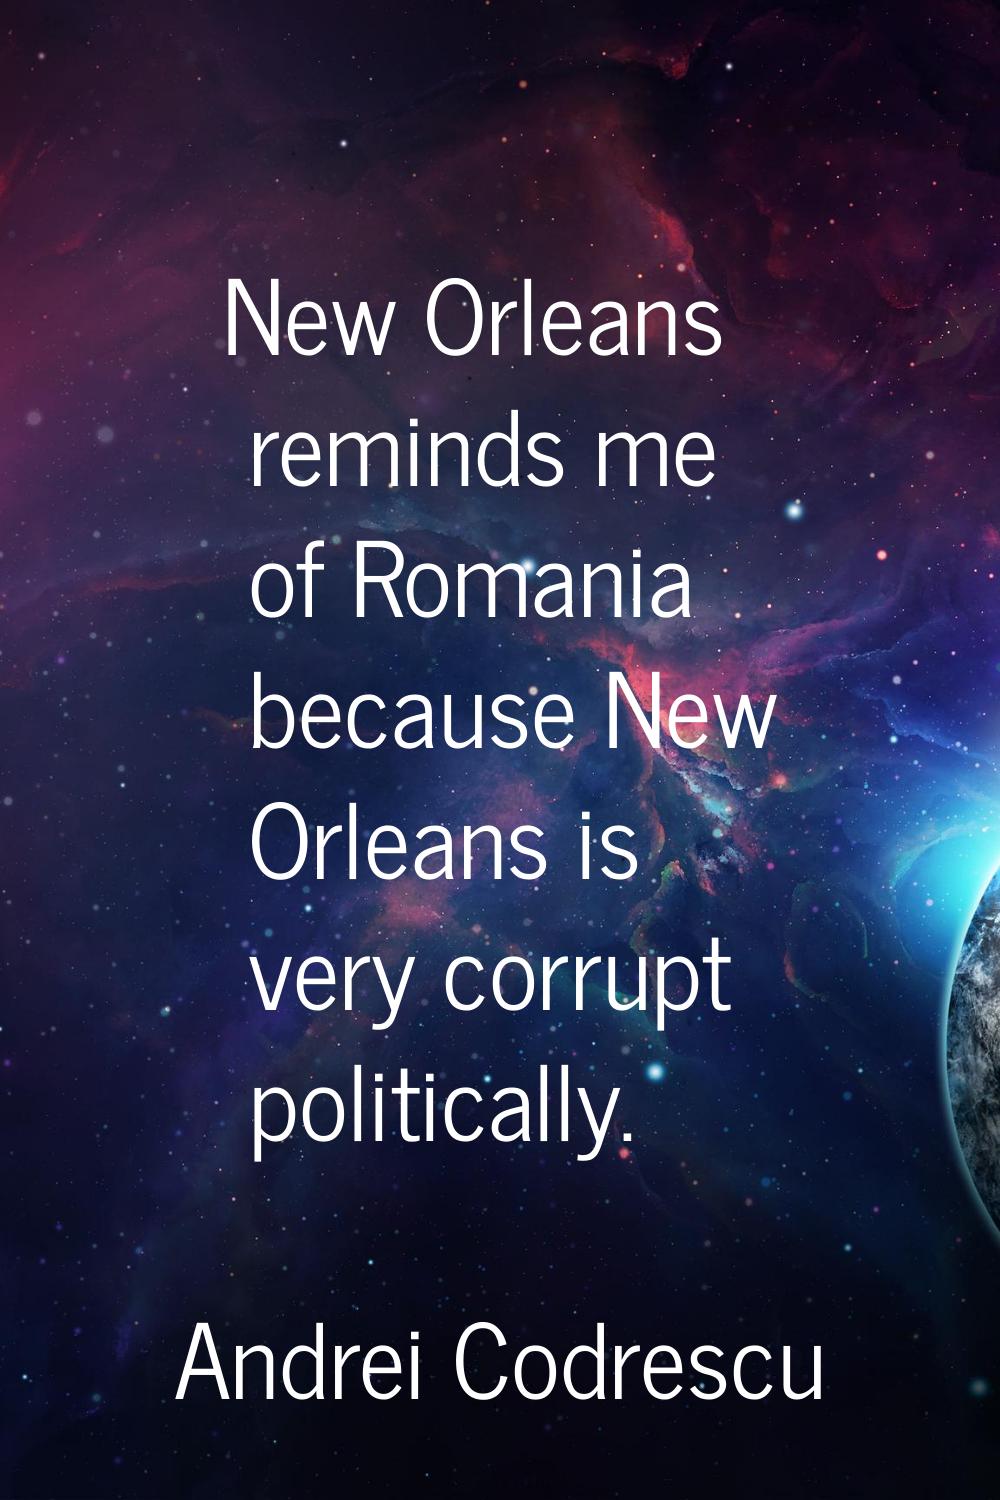 New Orleans reminds me of Romania because New Orleans is very corrupt politically.